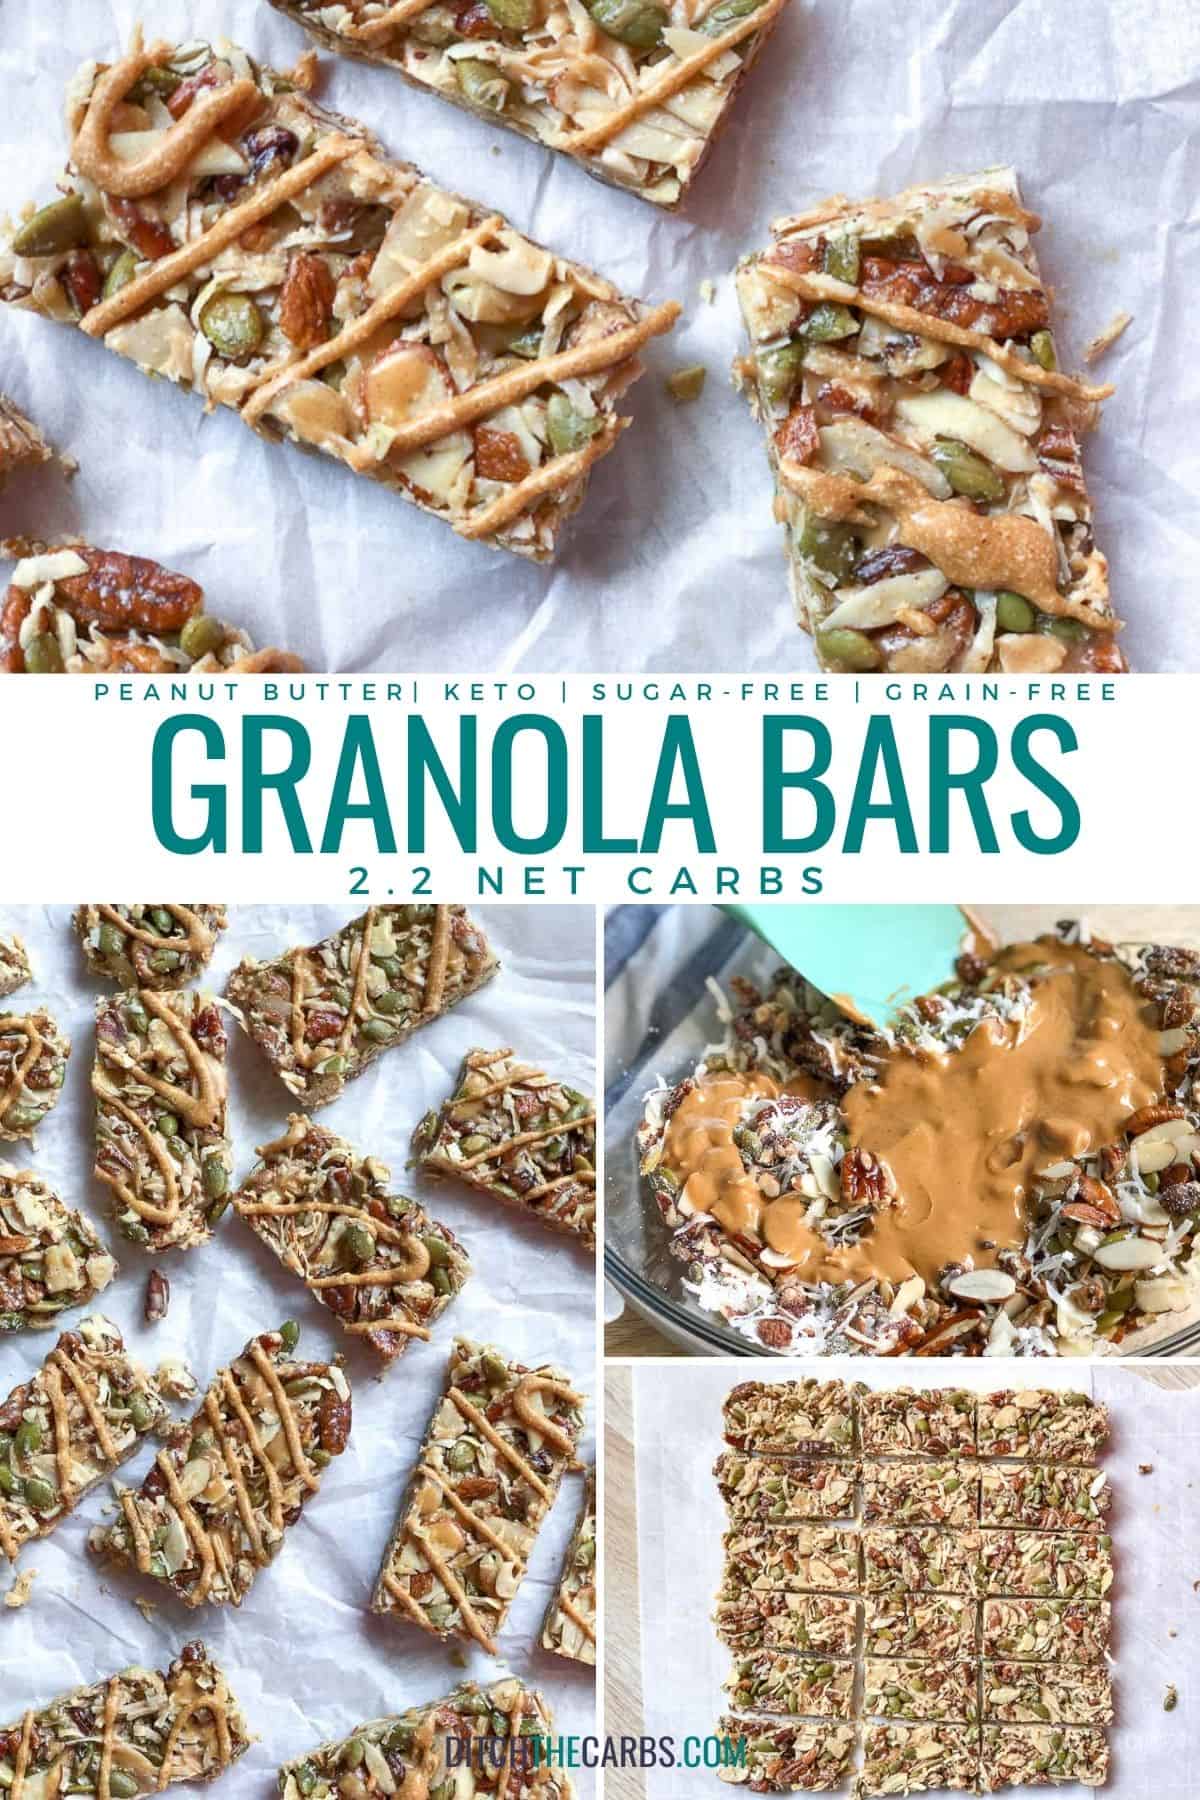 A collage of images showing peanut butter keto granola bars being made at different stages.